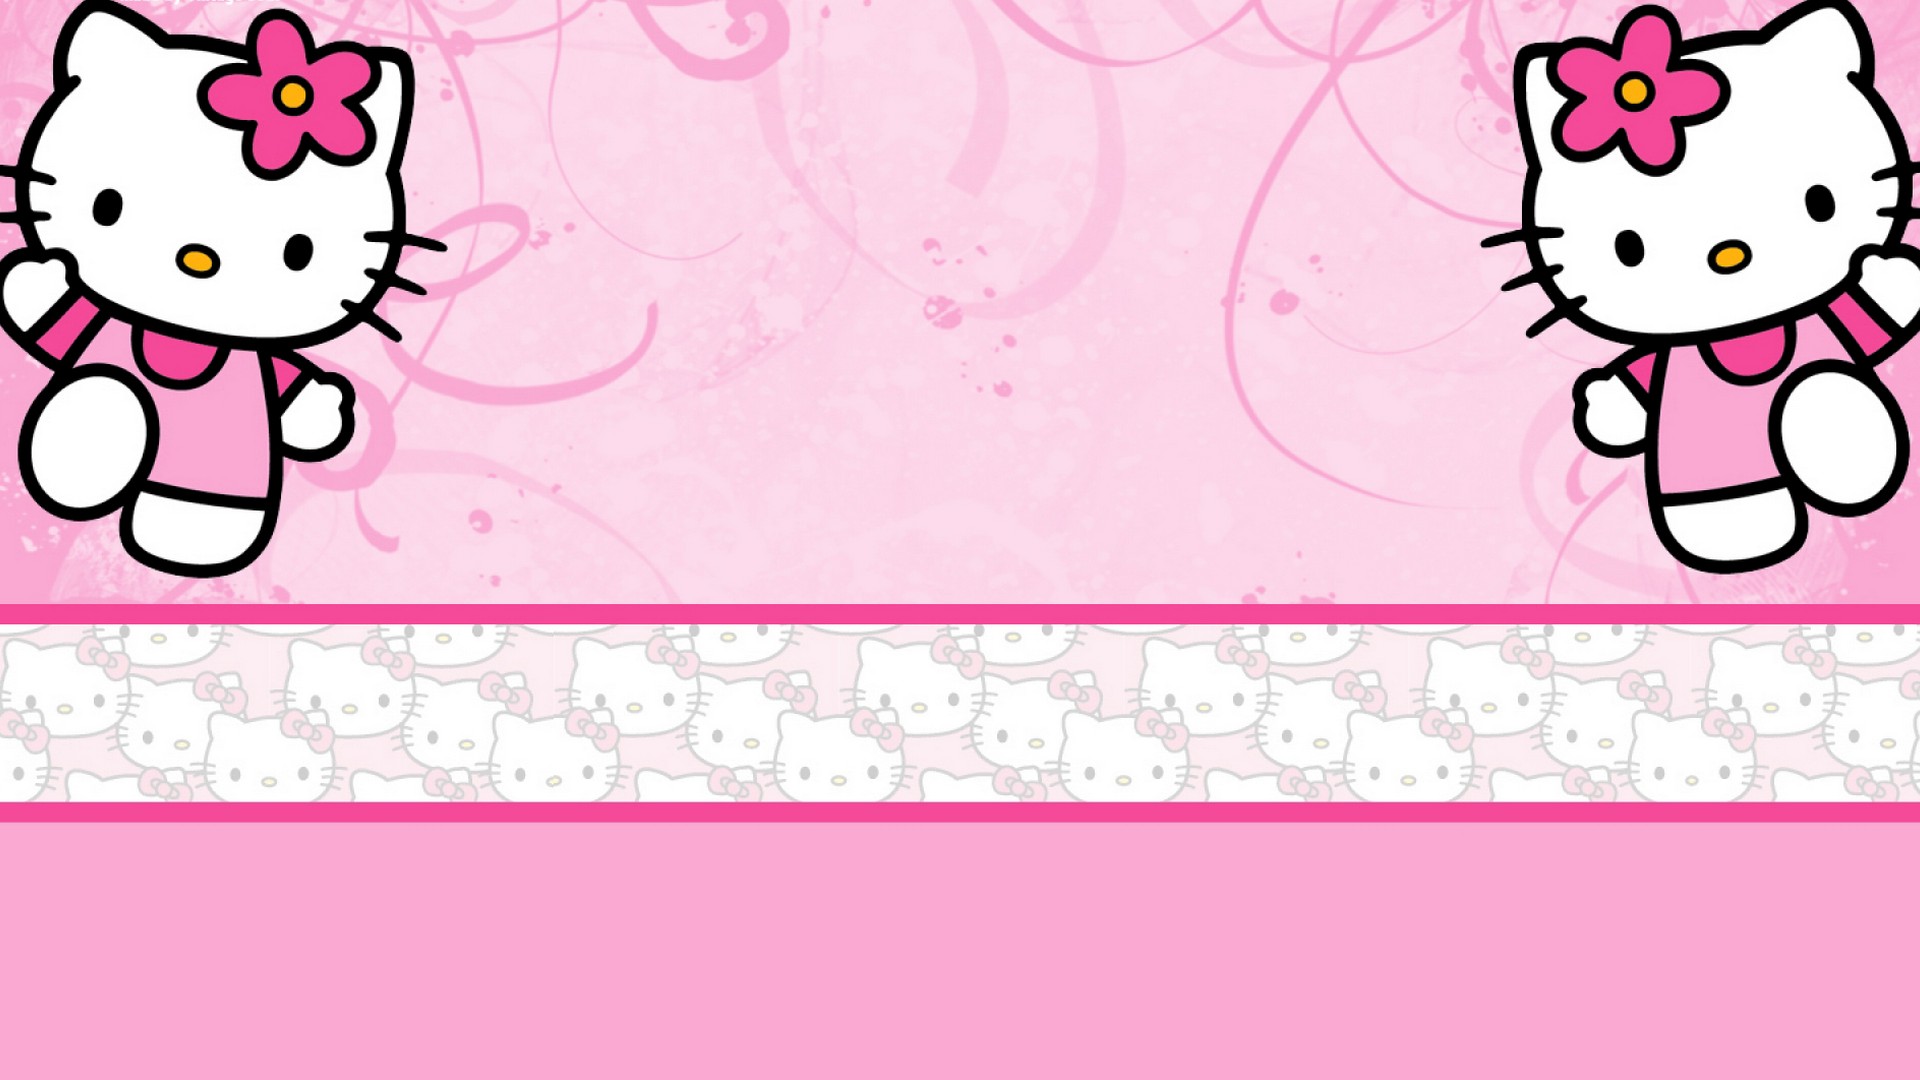 Hello Kitty Characters Wallpaper For Desktop with resolution 1920X1080 pixel. You can use this wallpaper as background for your desktop Computer Screensavers, Android or iPhone smartphones